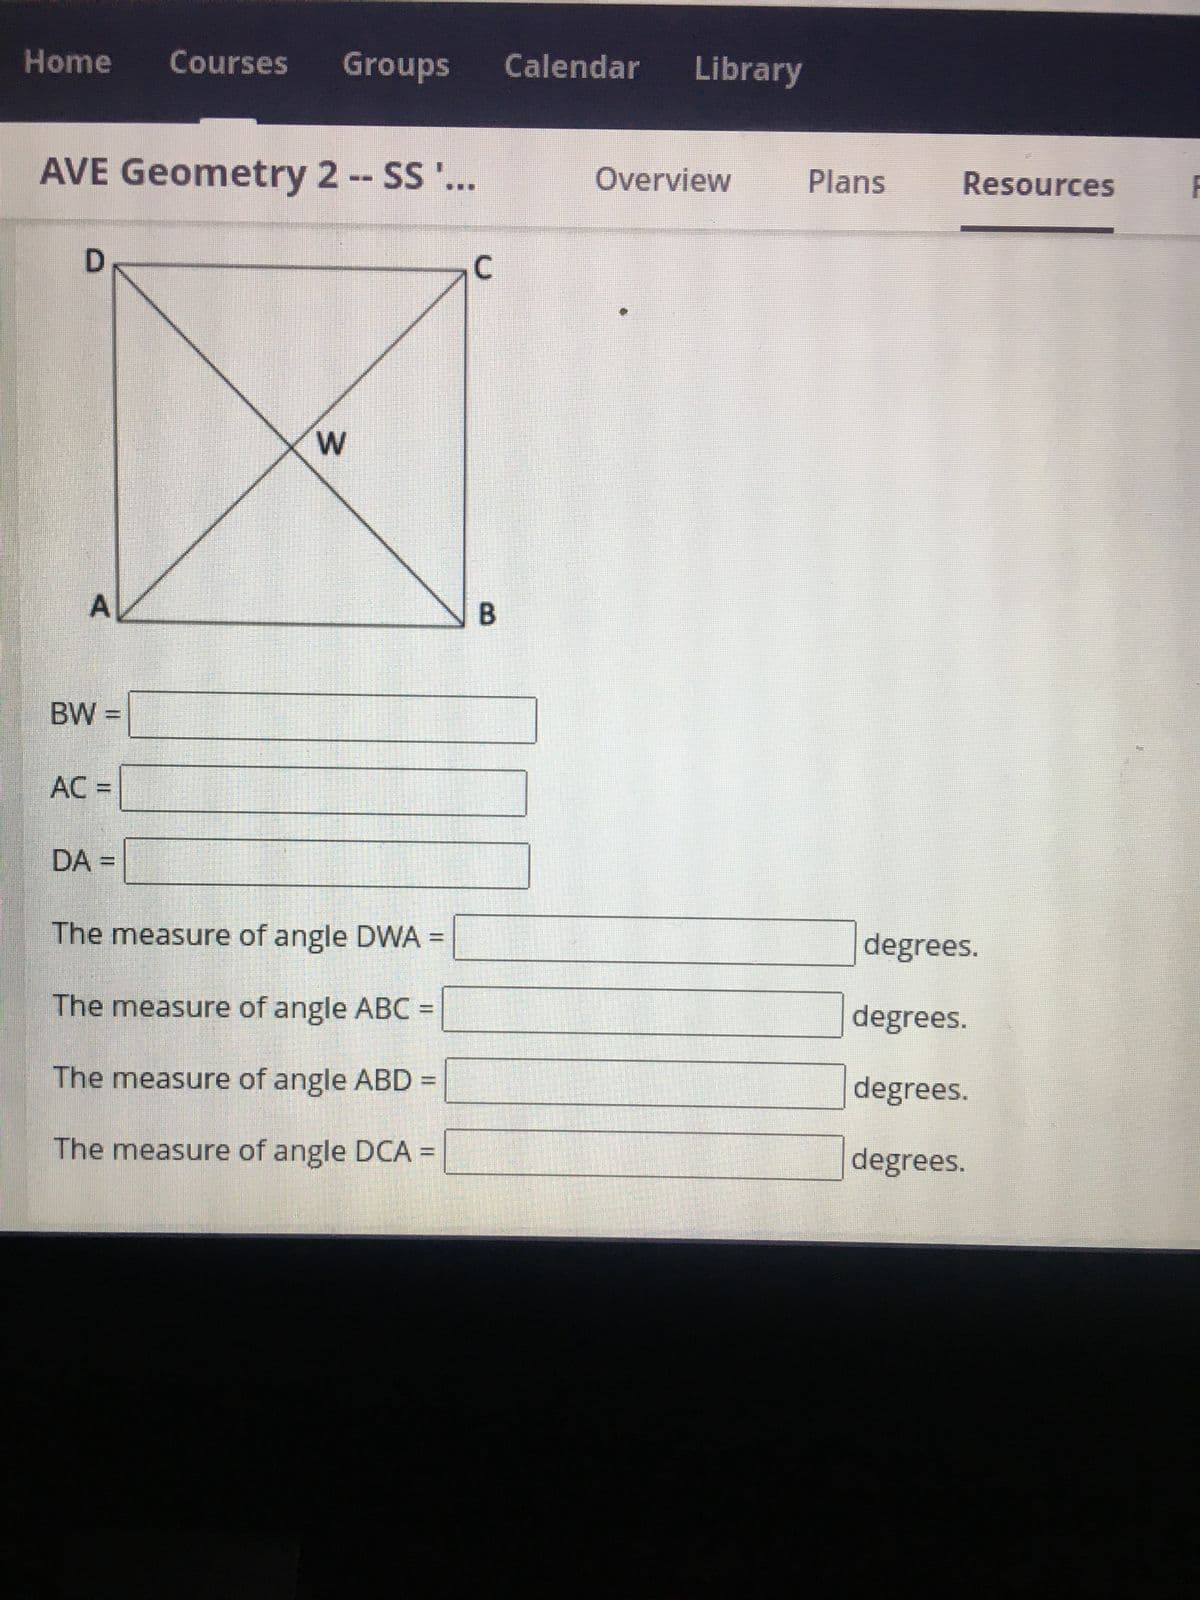 Home Courses Groups Calendar Library
AVE Geometry 2 -- SS ...
D
A
BW=
AC =
DA =
3
The measure of angle DWA =
The measure of angle ABC
The measure of angle ABD:
The measure of angle DCA =
C
B
Overview
Plans
Resources
degrees.
degrees.
degrees.
degrees.
F